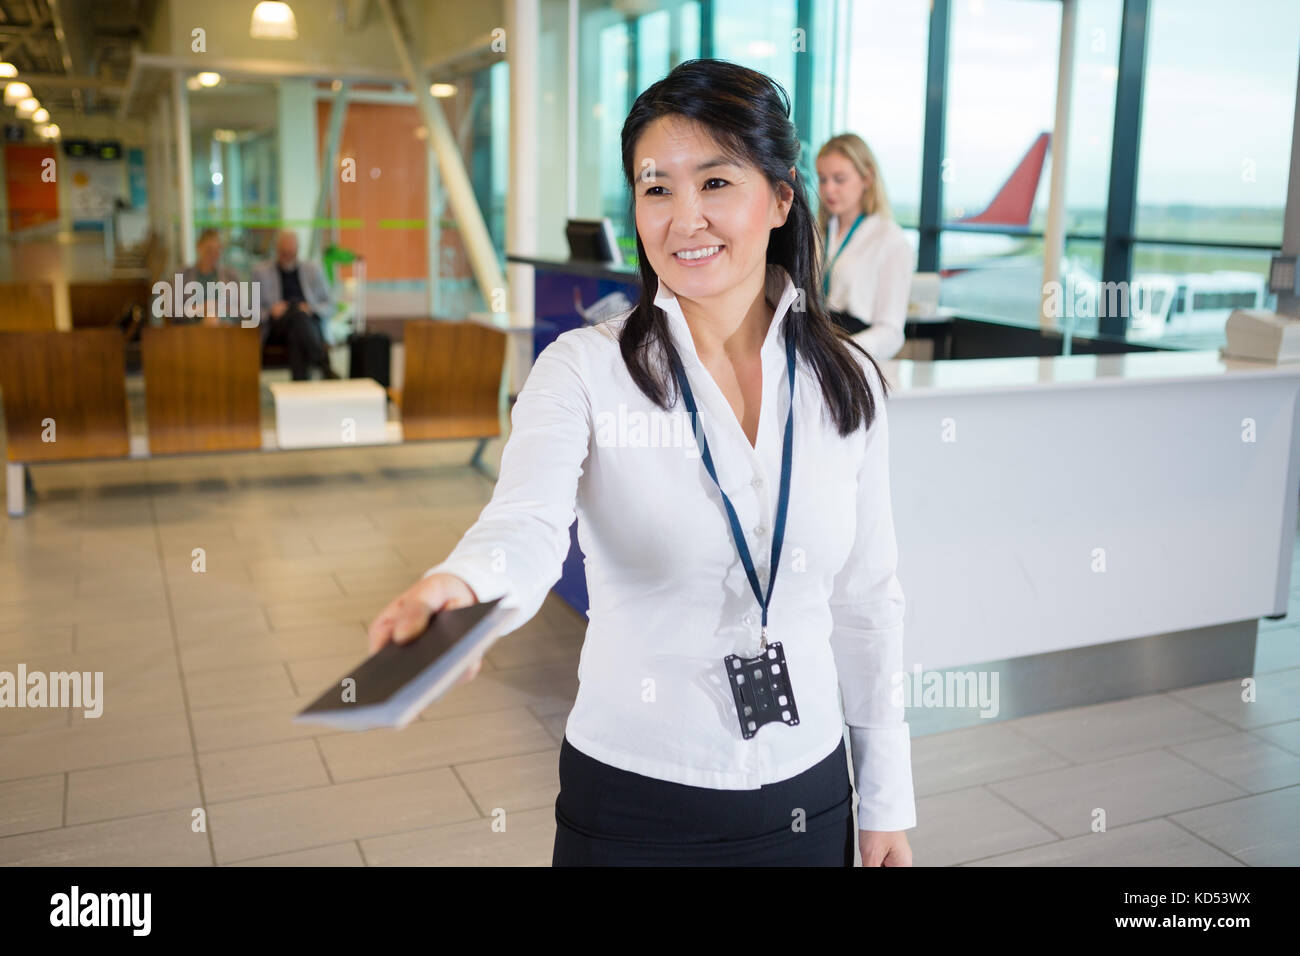 Smiling mid adult female staff member giving passport at airport terminal Stock Photo